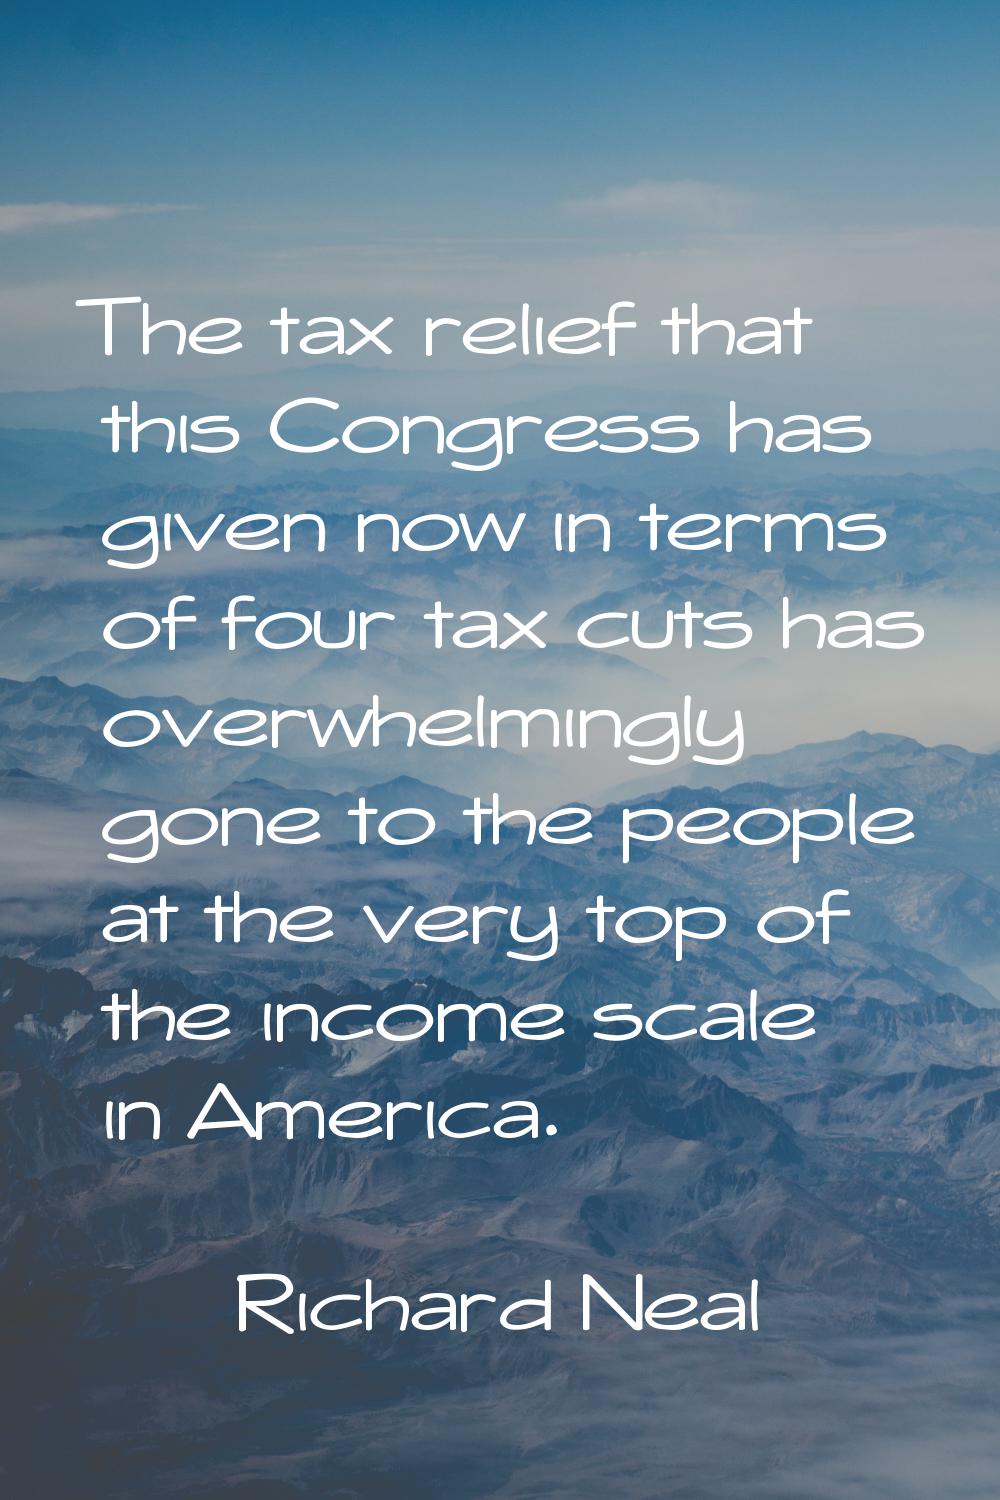 The tax relief that this Congress has given now in terms of four tax cuts has overwhelmingly gone t